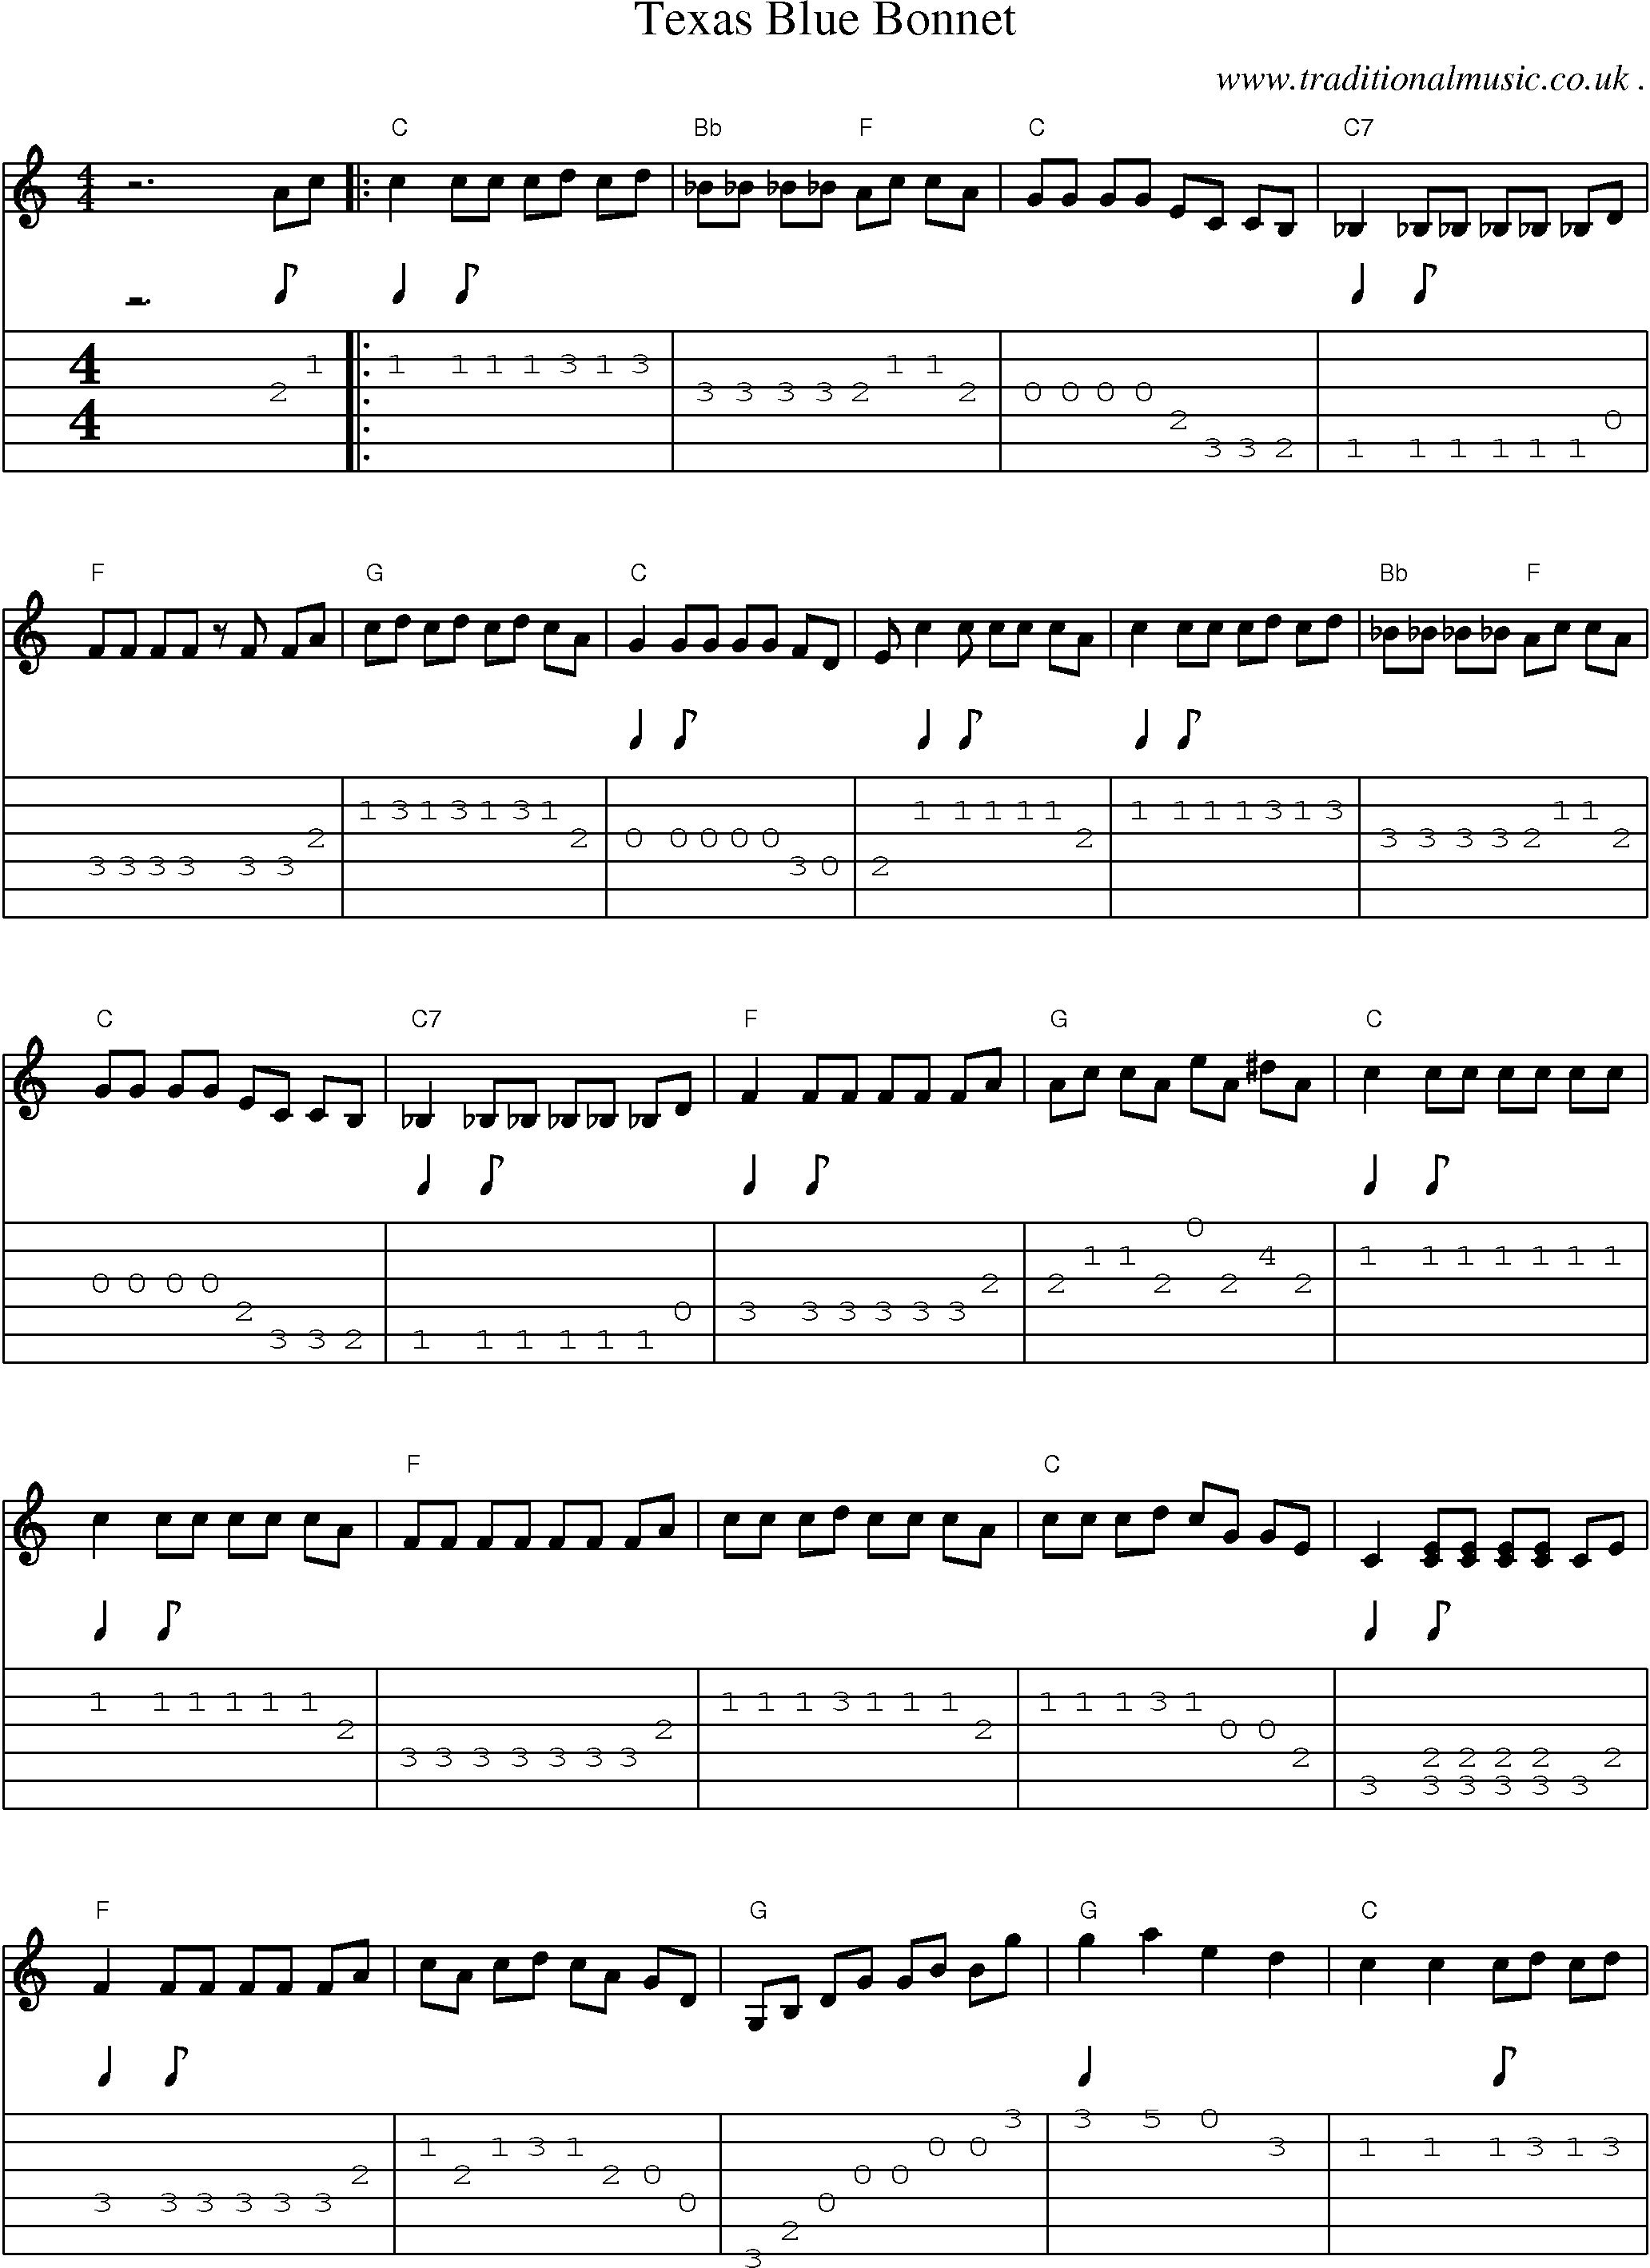 Music Score and Guitar Tabs for Texas Blue Bonnet